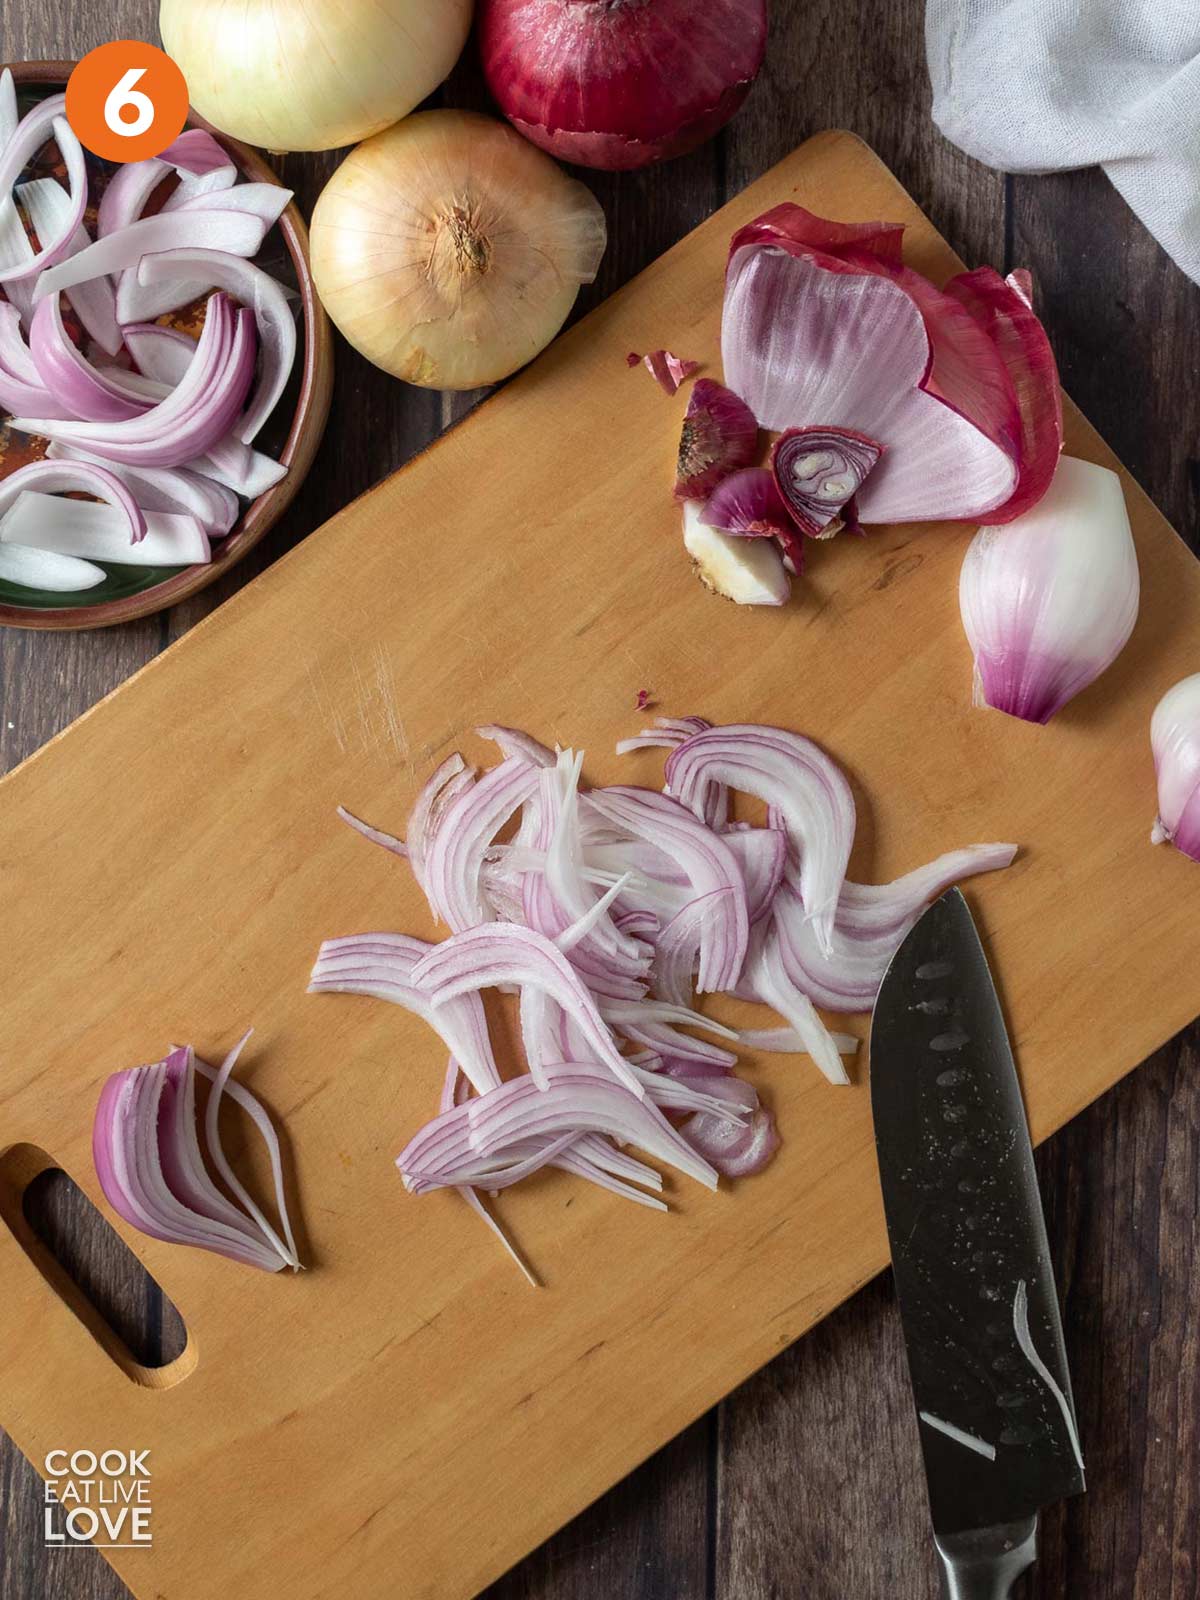 Onion slices on the cutting board when done.